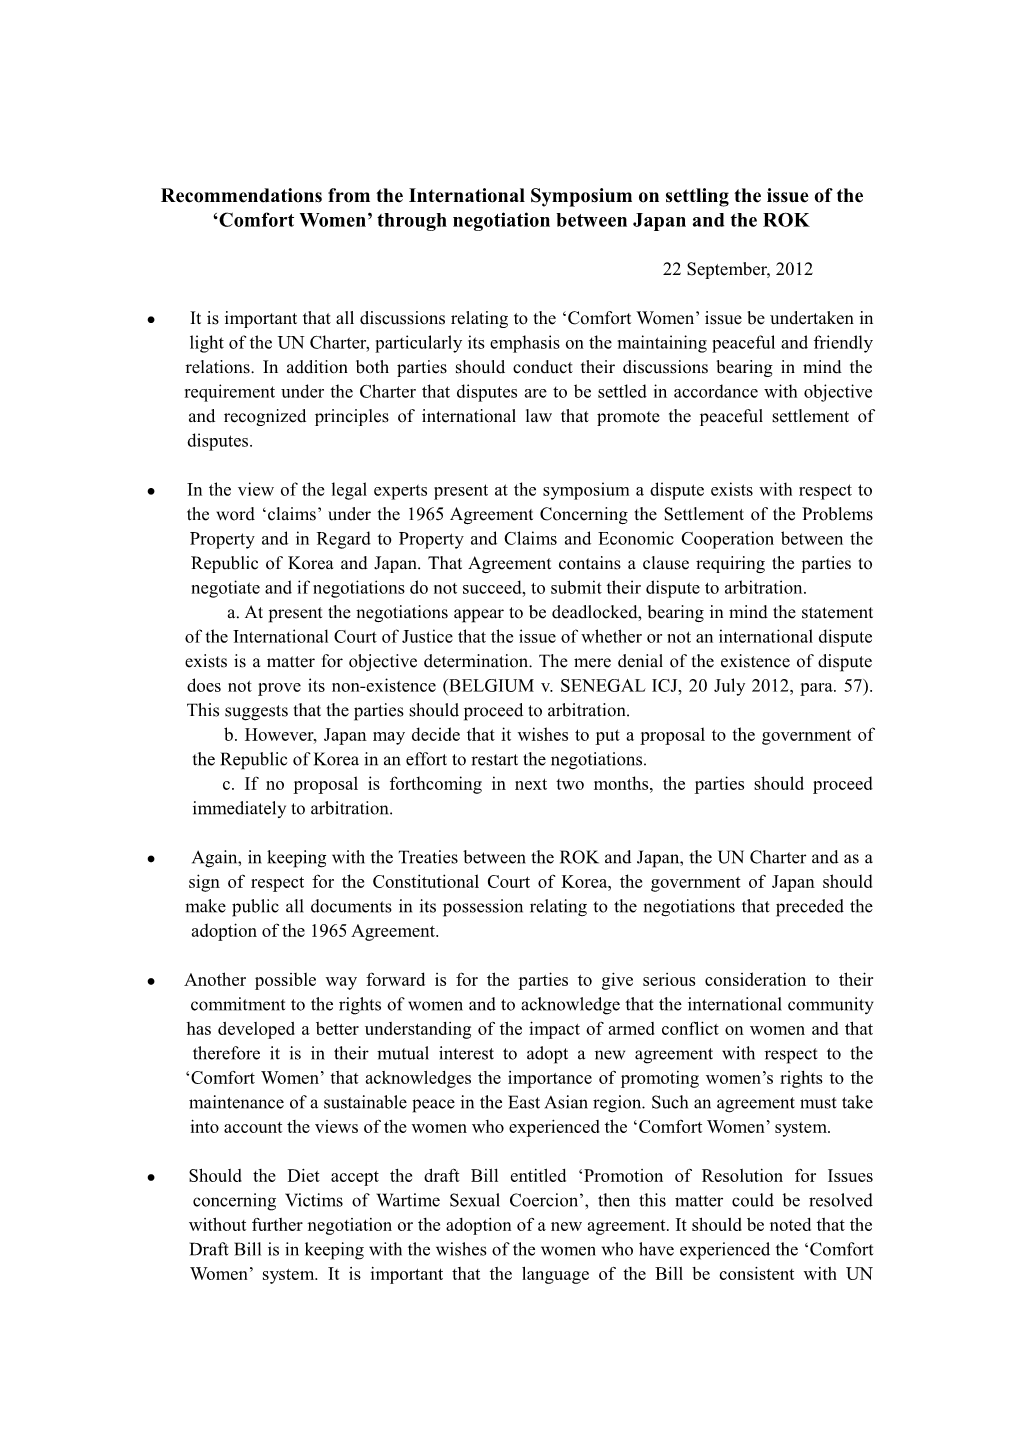 Recommendations from the International Symposium on Settling the Issue of the Comfort Women